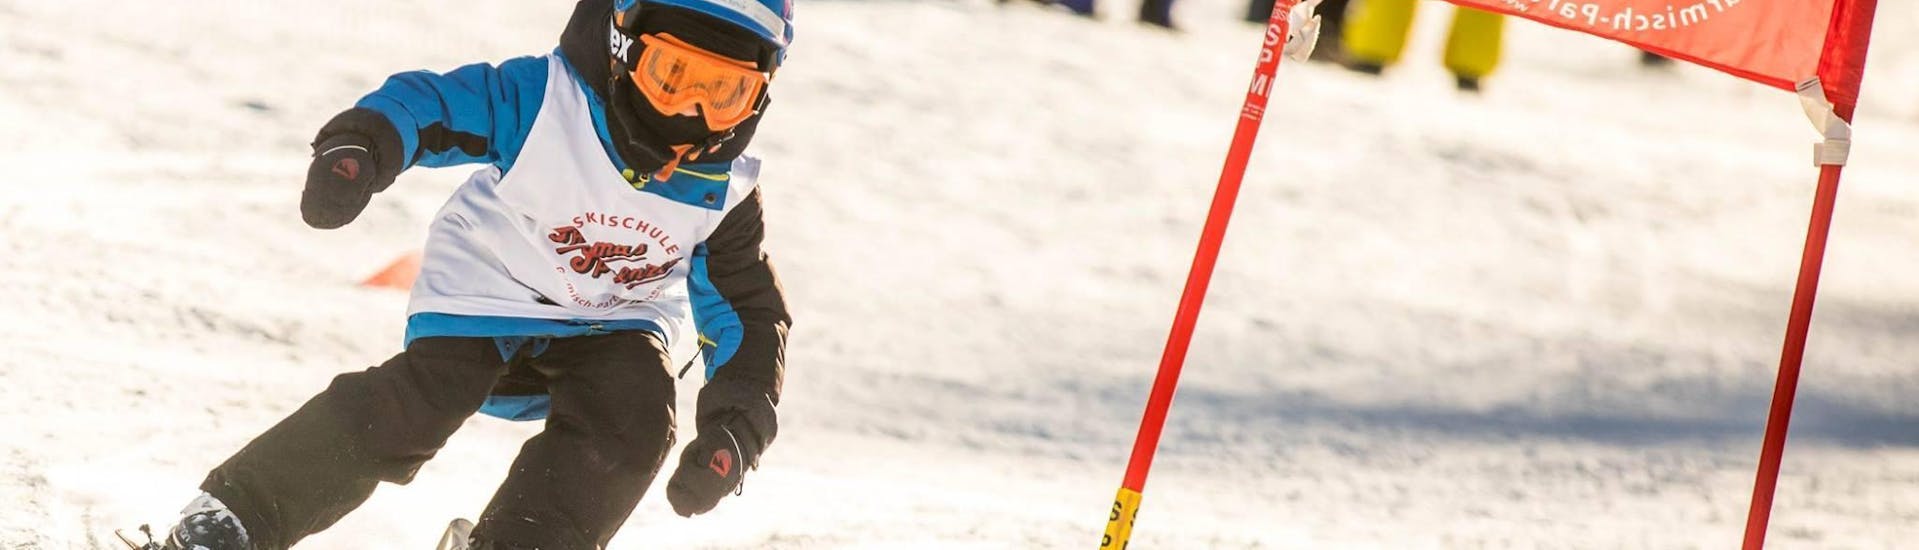 A young child is racing down a race course as part of its Kids Ski Lessons (4-12 years) - All Levels with the ski school Skischule Thomas Sprenzel in the ski resort of Garmisch-Classic.